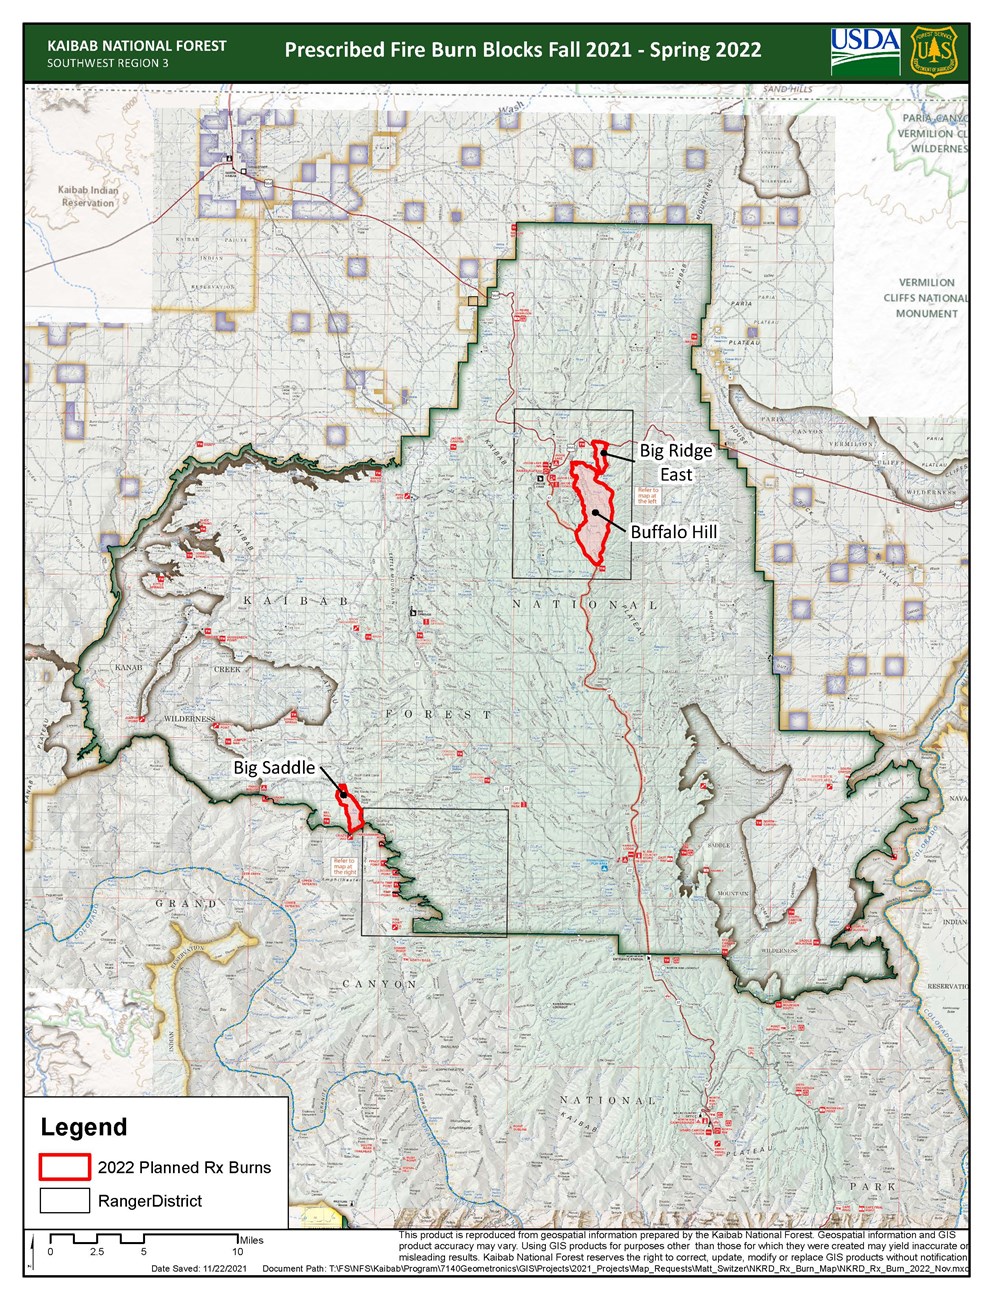 Map showing prescribed fire areas on the Kaibab National Forest